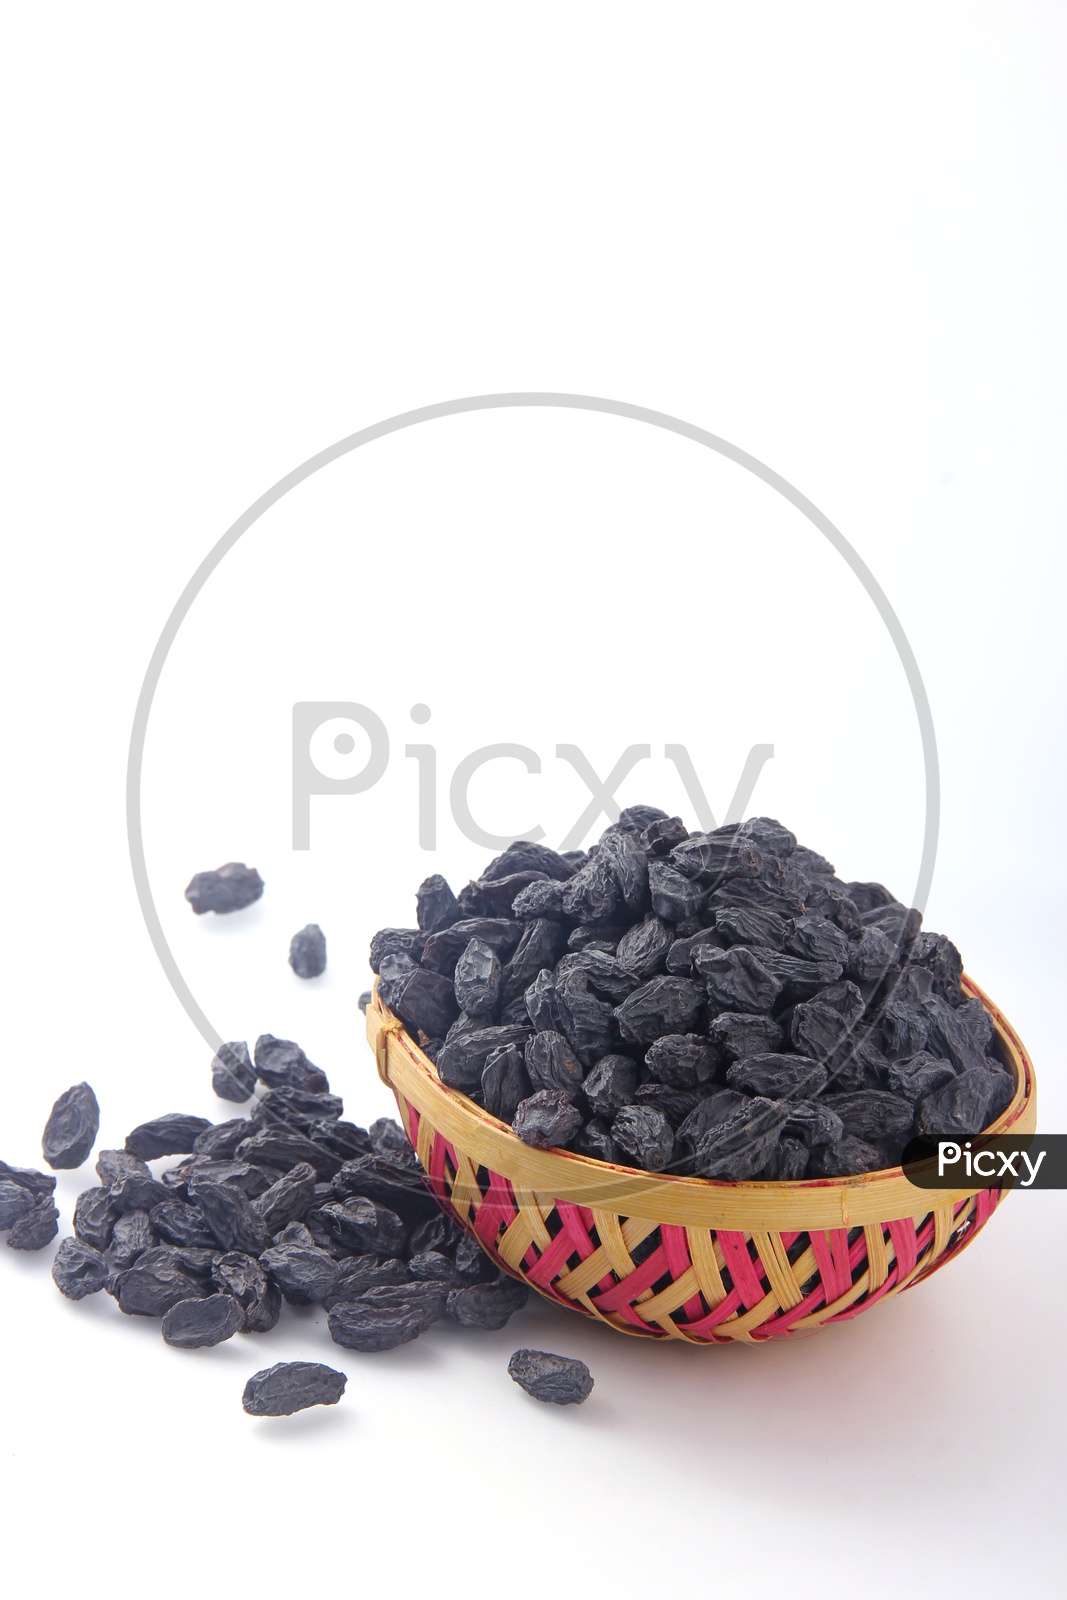 Dried fruit -  Kiss miss in a bowl  on white background